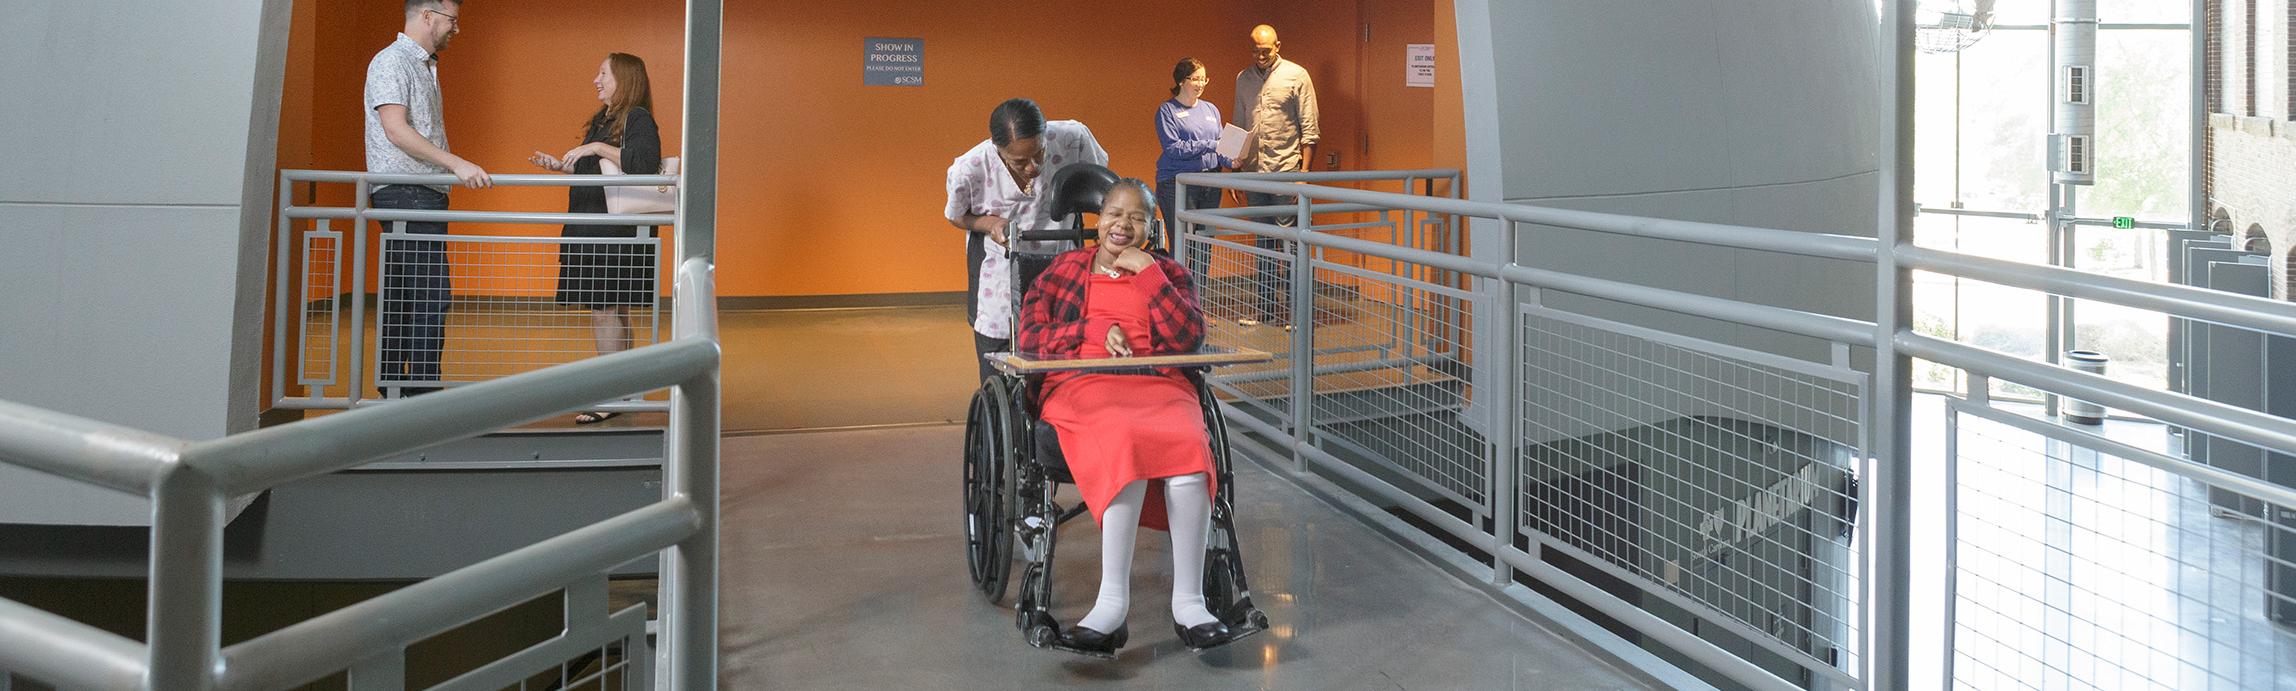 Large dome structure with exit midway up onto a catwalk space. Guest in wheelchair is on catwalk with caretaker and other guests in the background.